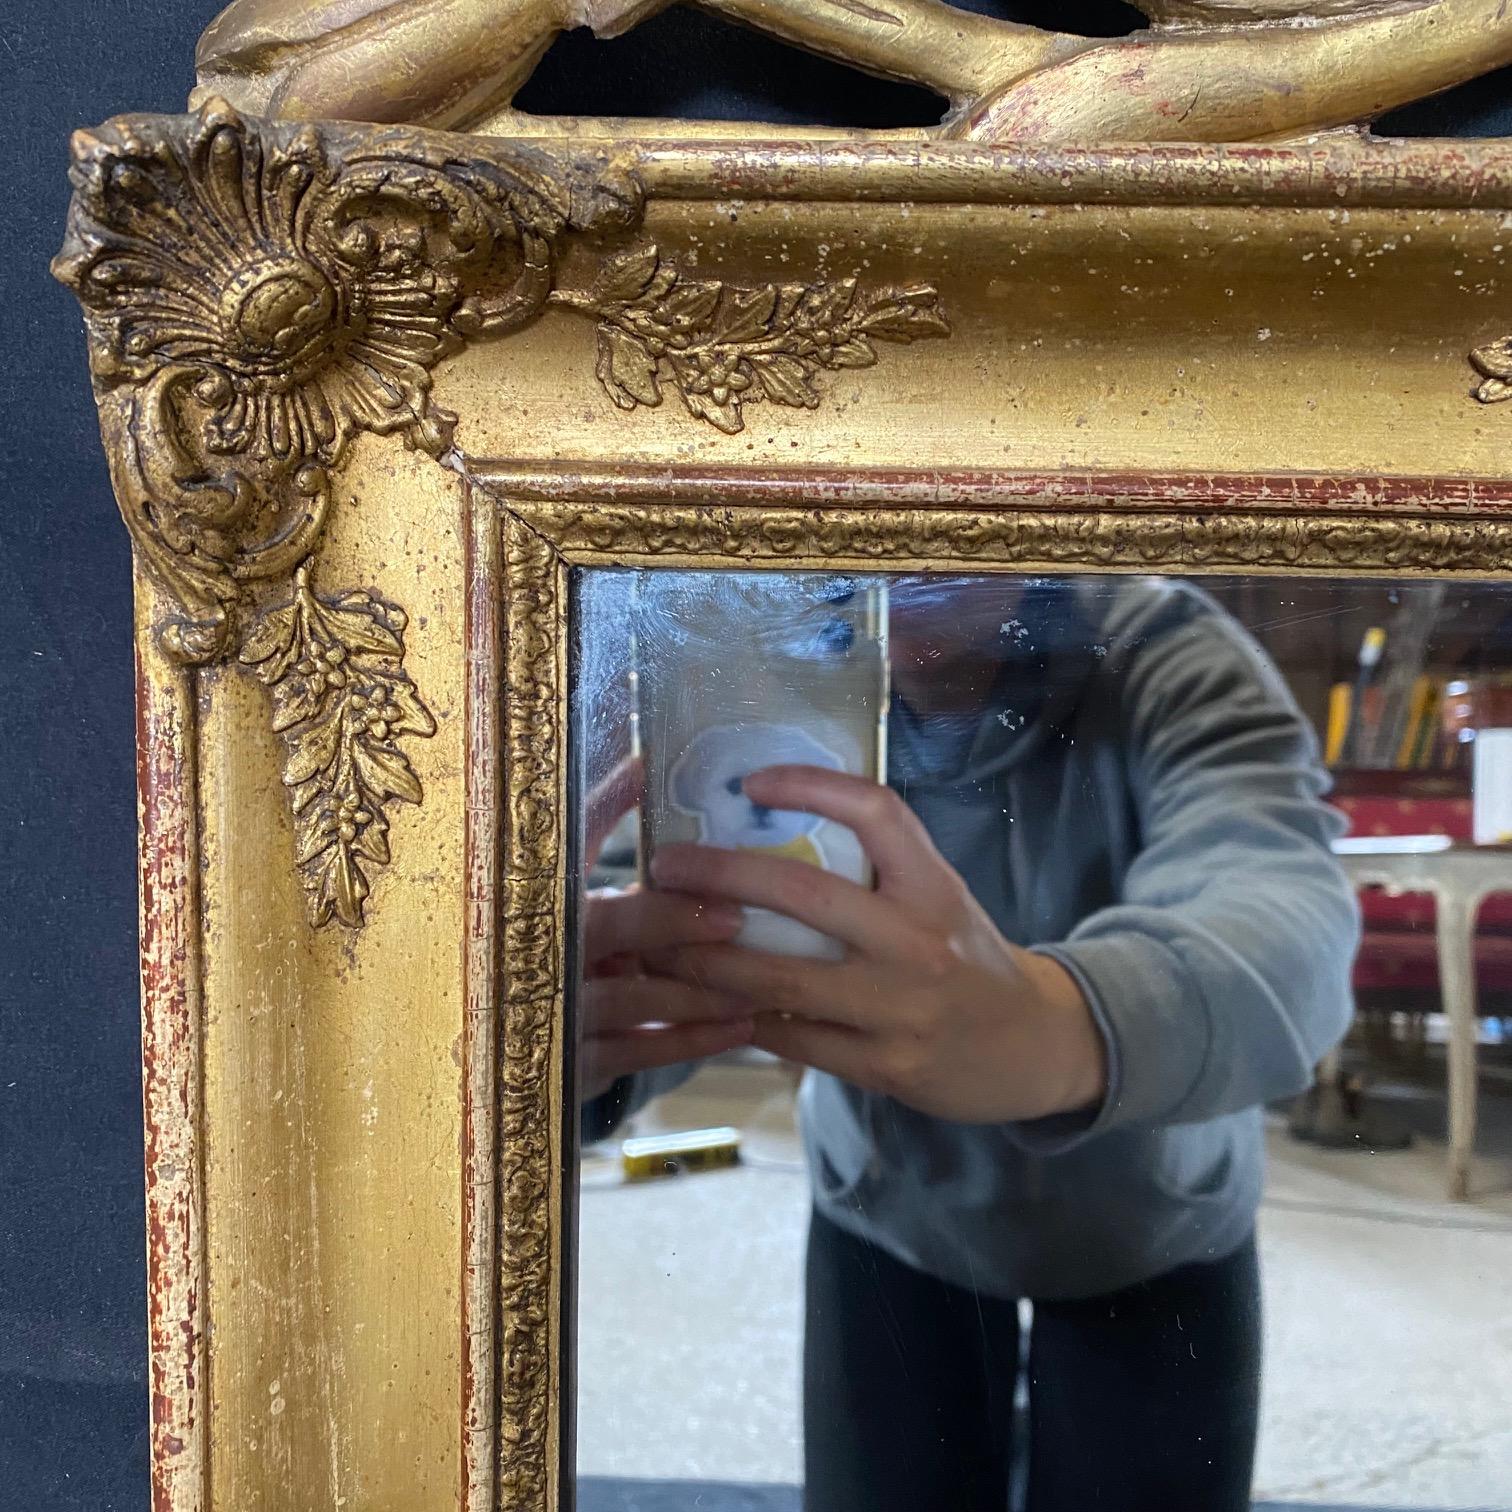 Rare Gem French Antique Louis XVI Mirror with Intricate Fronton Carving  For Sale 1